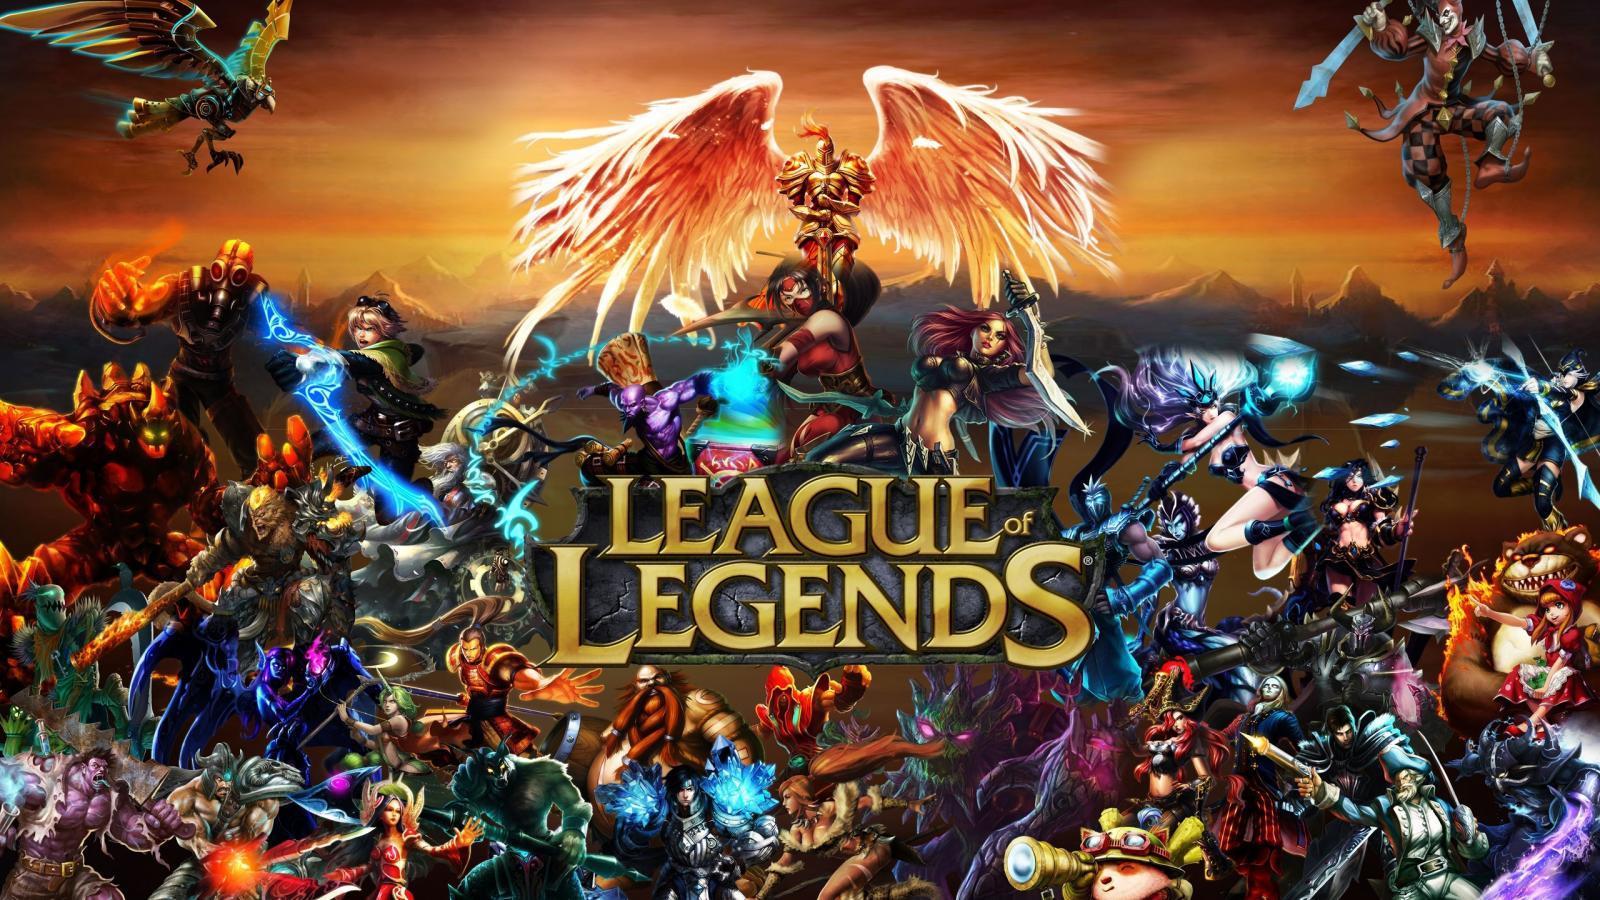 League of Legends for mobile and consoles is coming in 2020